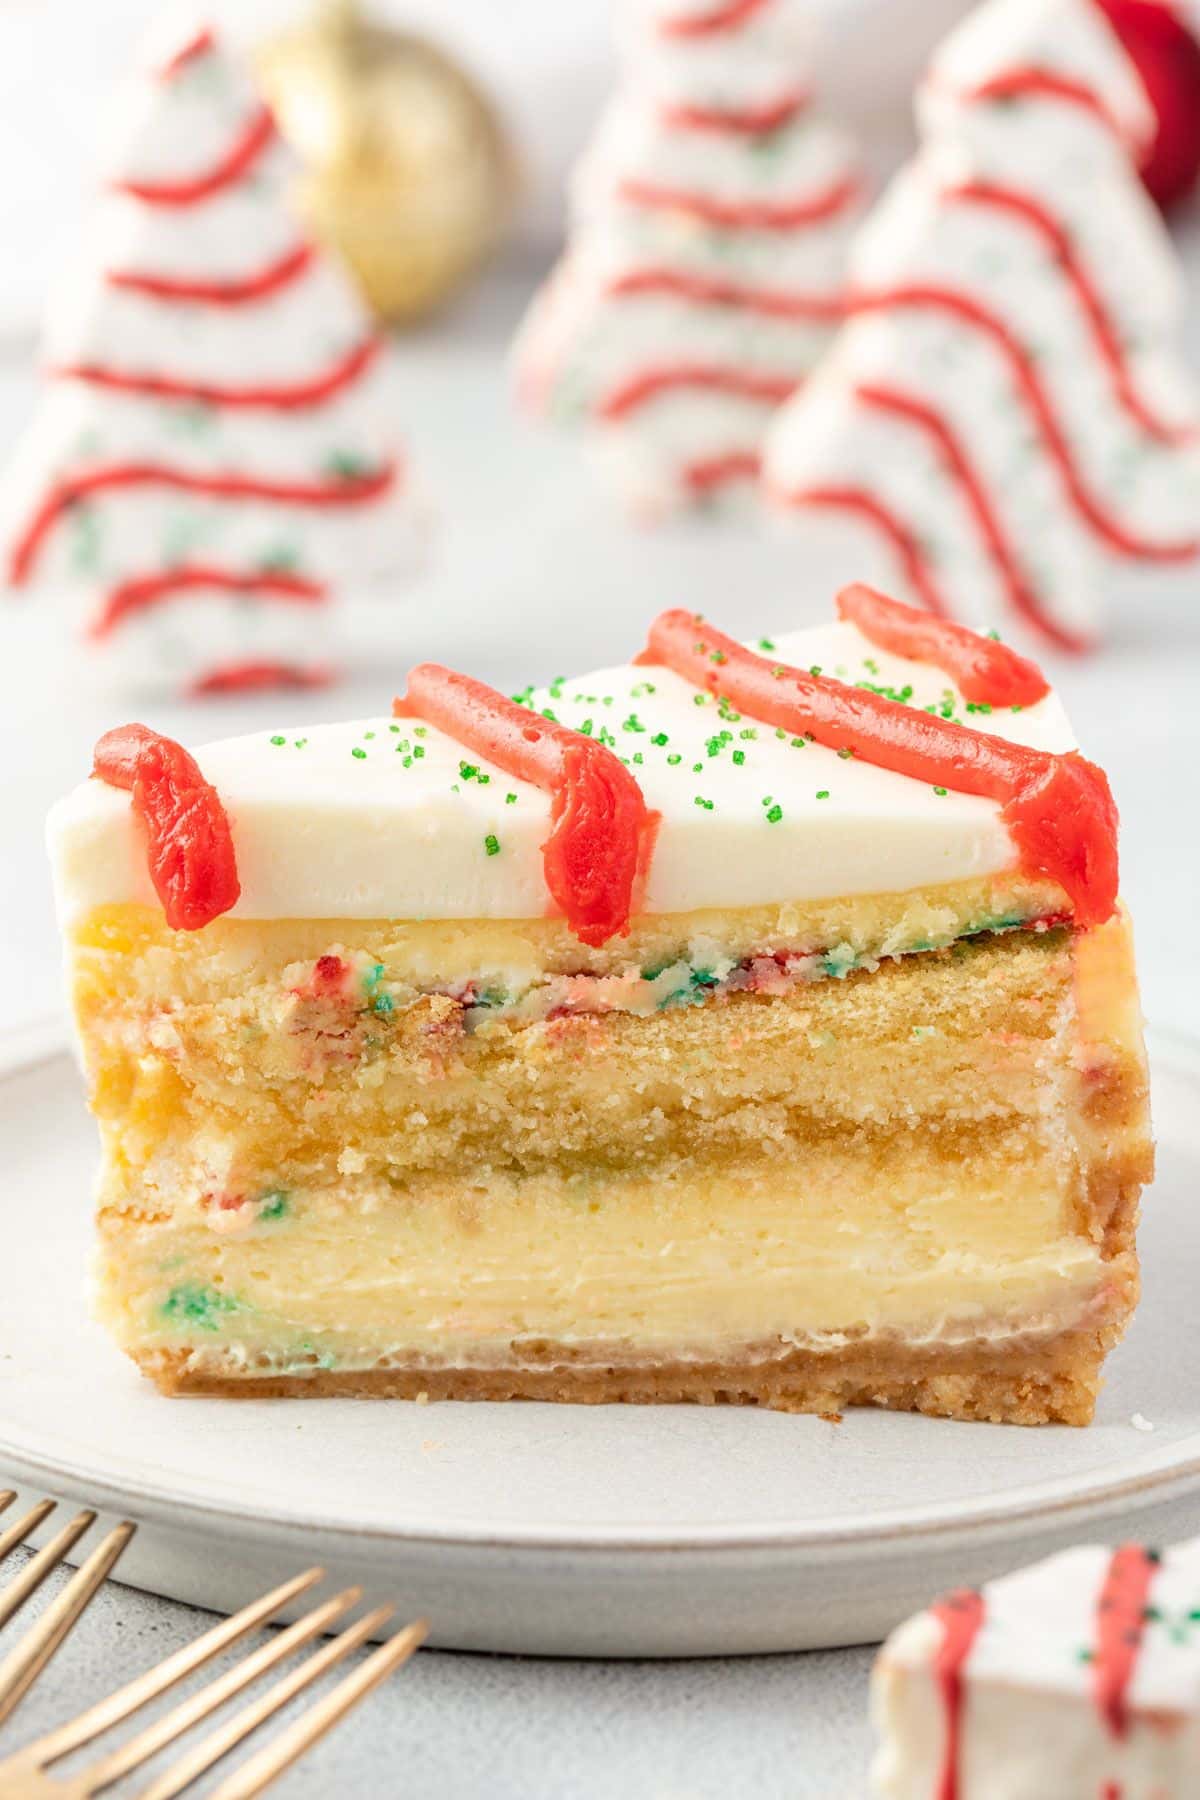 Slice of cheesecake on a plate, showing layers of crust, cheesecake, cake, more cheesecake, and frosting, with Little Debbie trees standing in background.